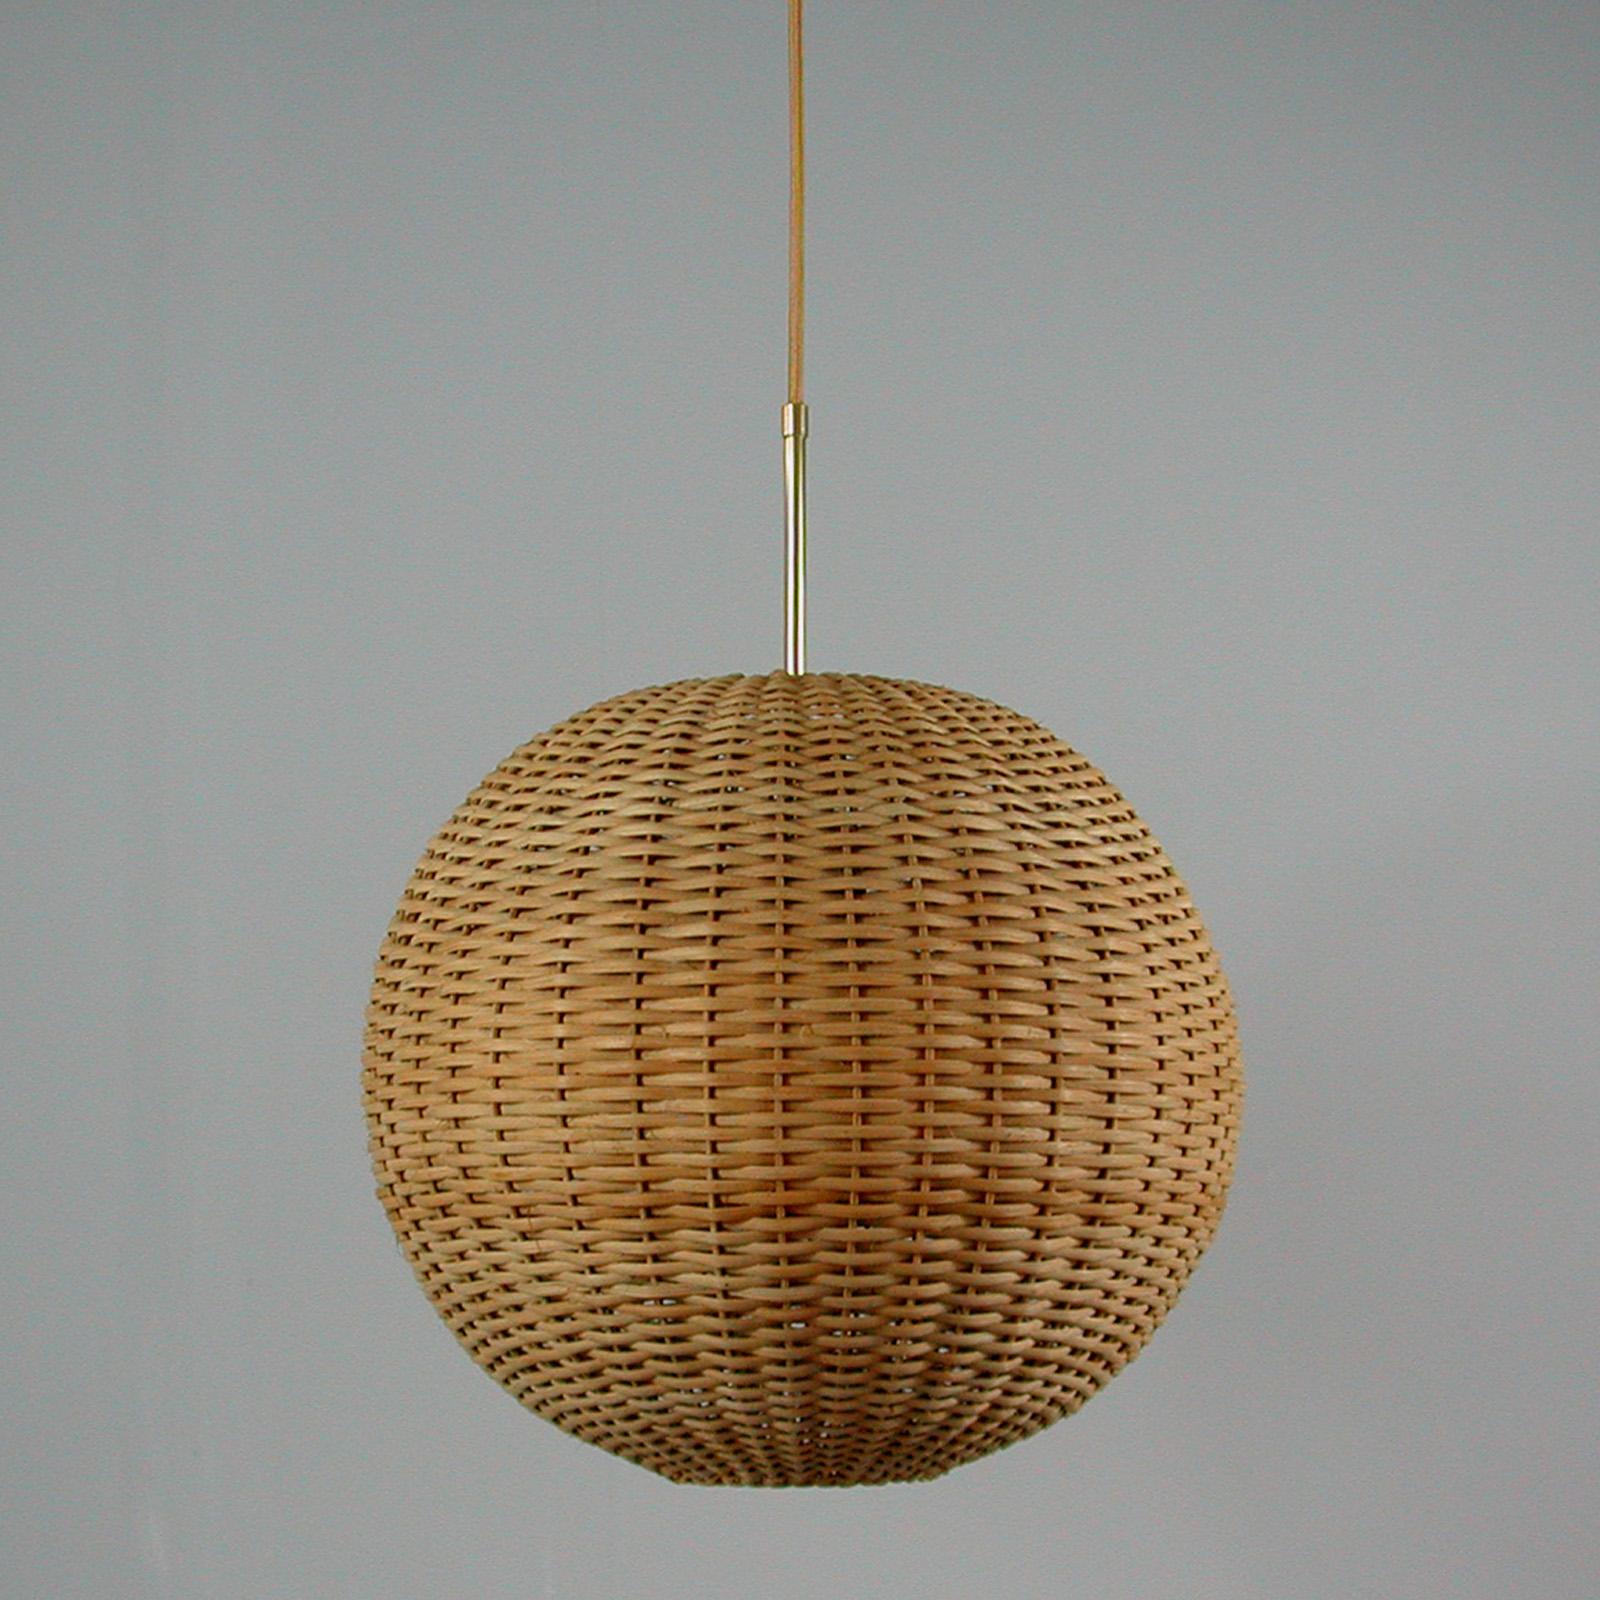 This awesome globe pendant was designed and manufactured in Sweden in the 1960s. It features a wicker lampshade with brass hardware. The lamp has got a very nice warm light when lit and looks amazing. This lamp requires one E27 bulb up to 100 watt